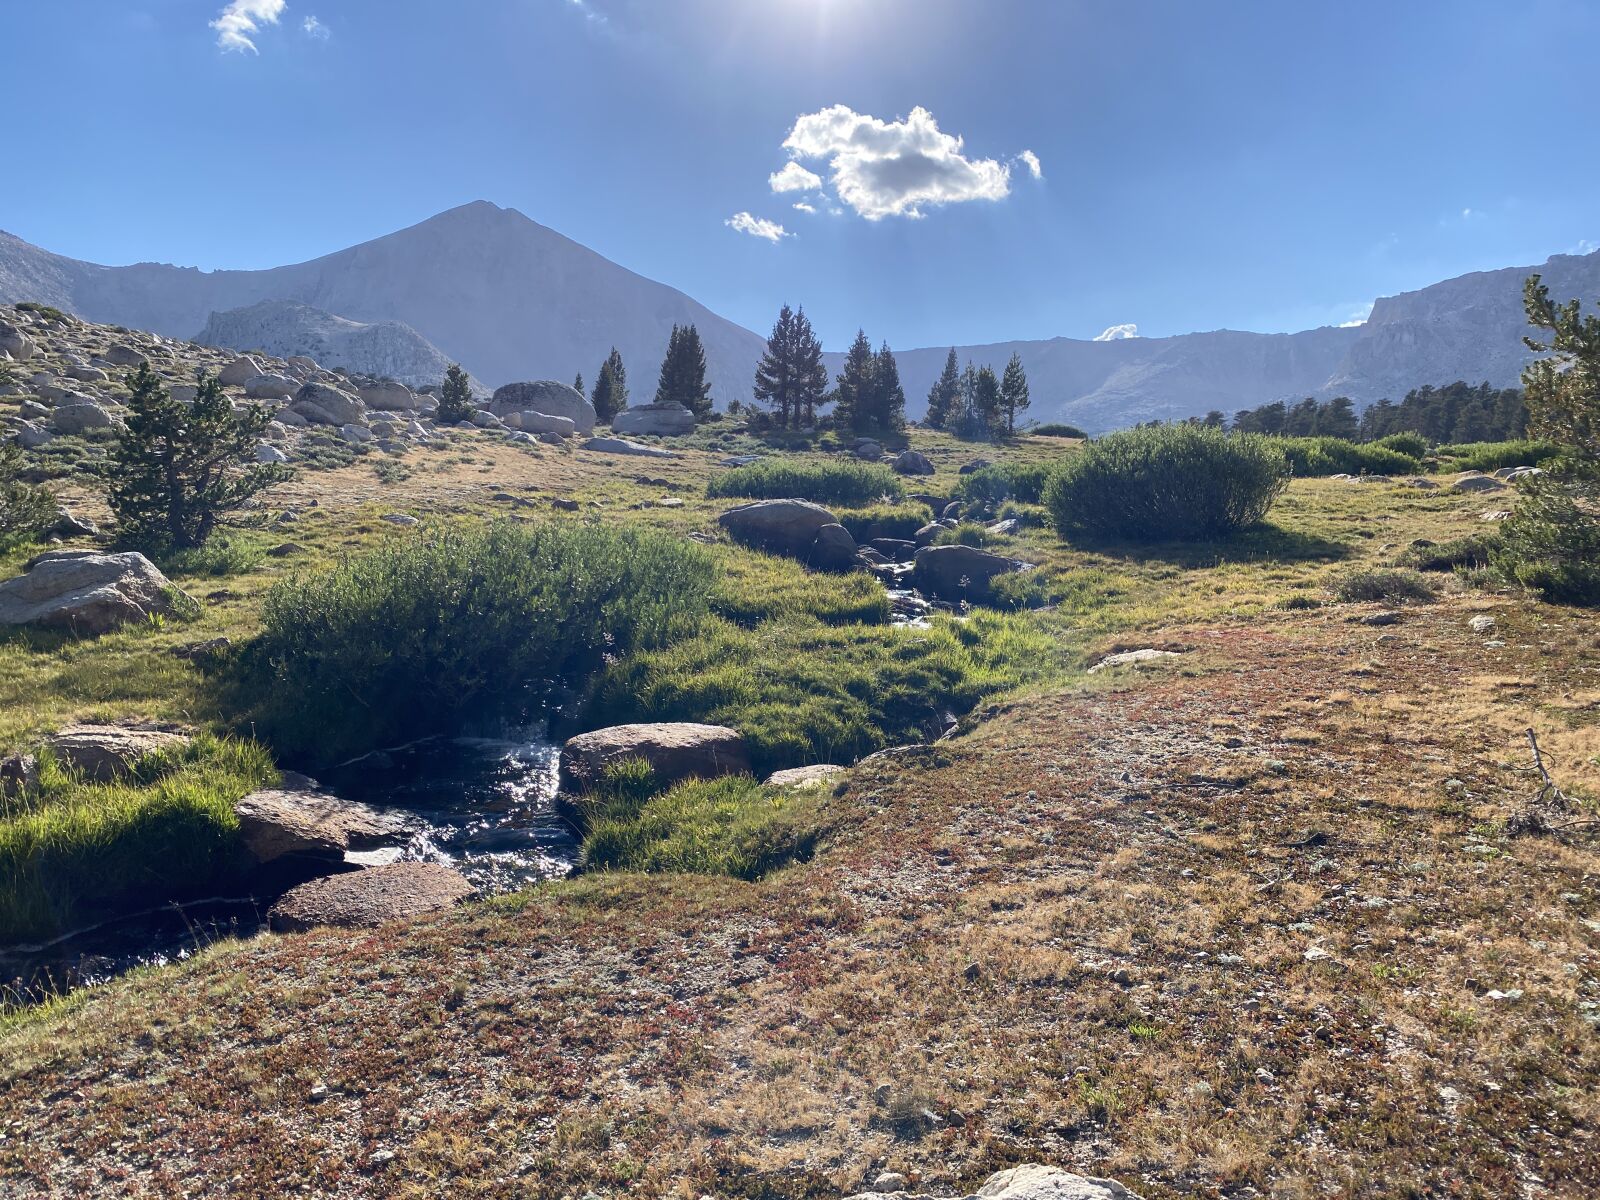 Apple iPhone 11 Pro + iPhone 11 Pro back triple camera 4.25mm f/1.8 sample photo. Remote wilderness, mountain stream photography